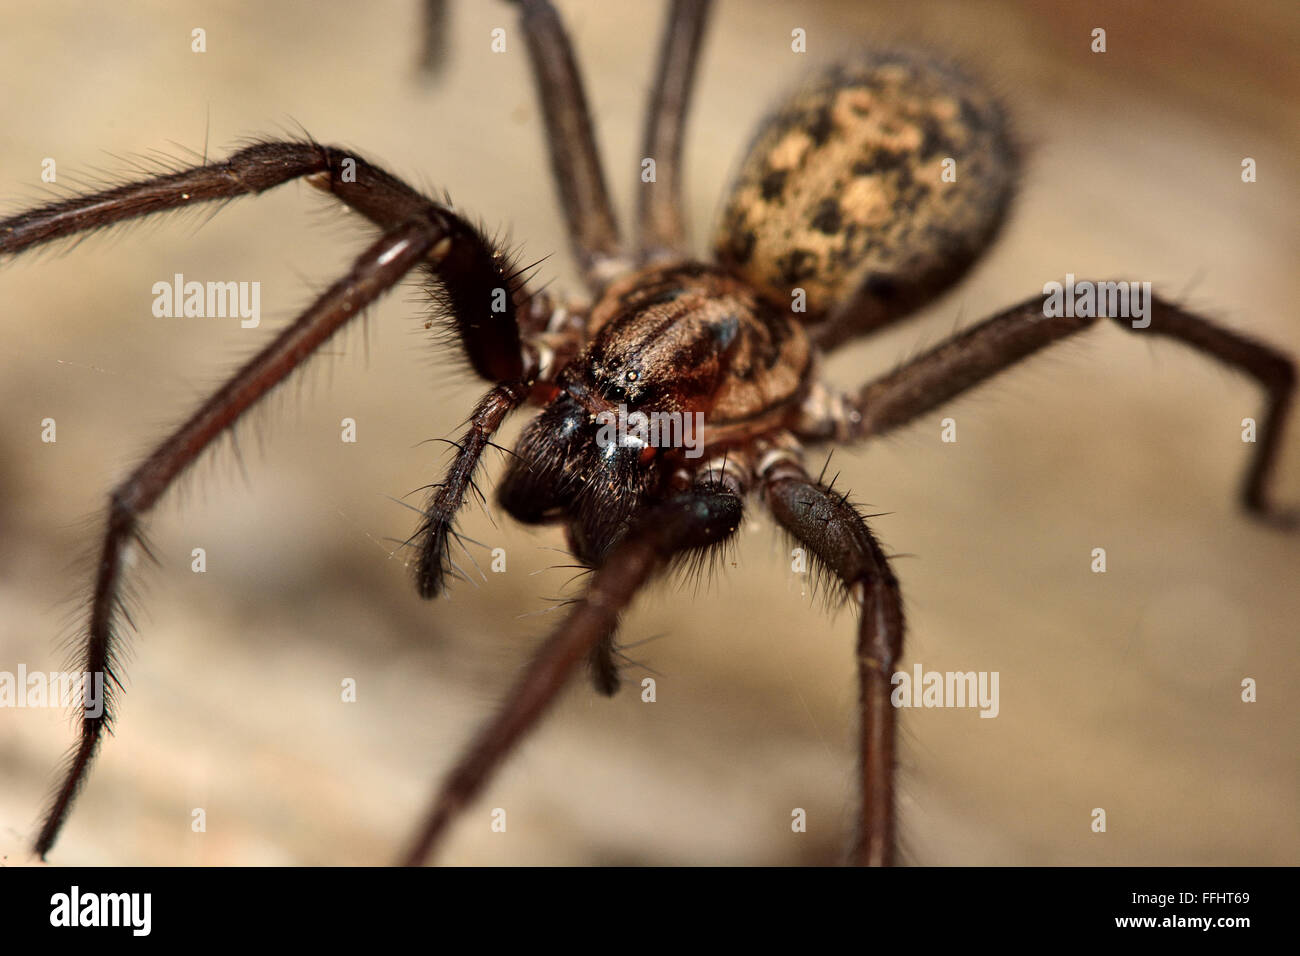 Common house spider (Tegenaria domestica). A large spider in the family Agelenidae, active at night and showing large fangs Stock Photo